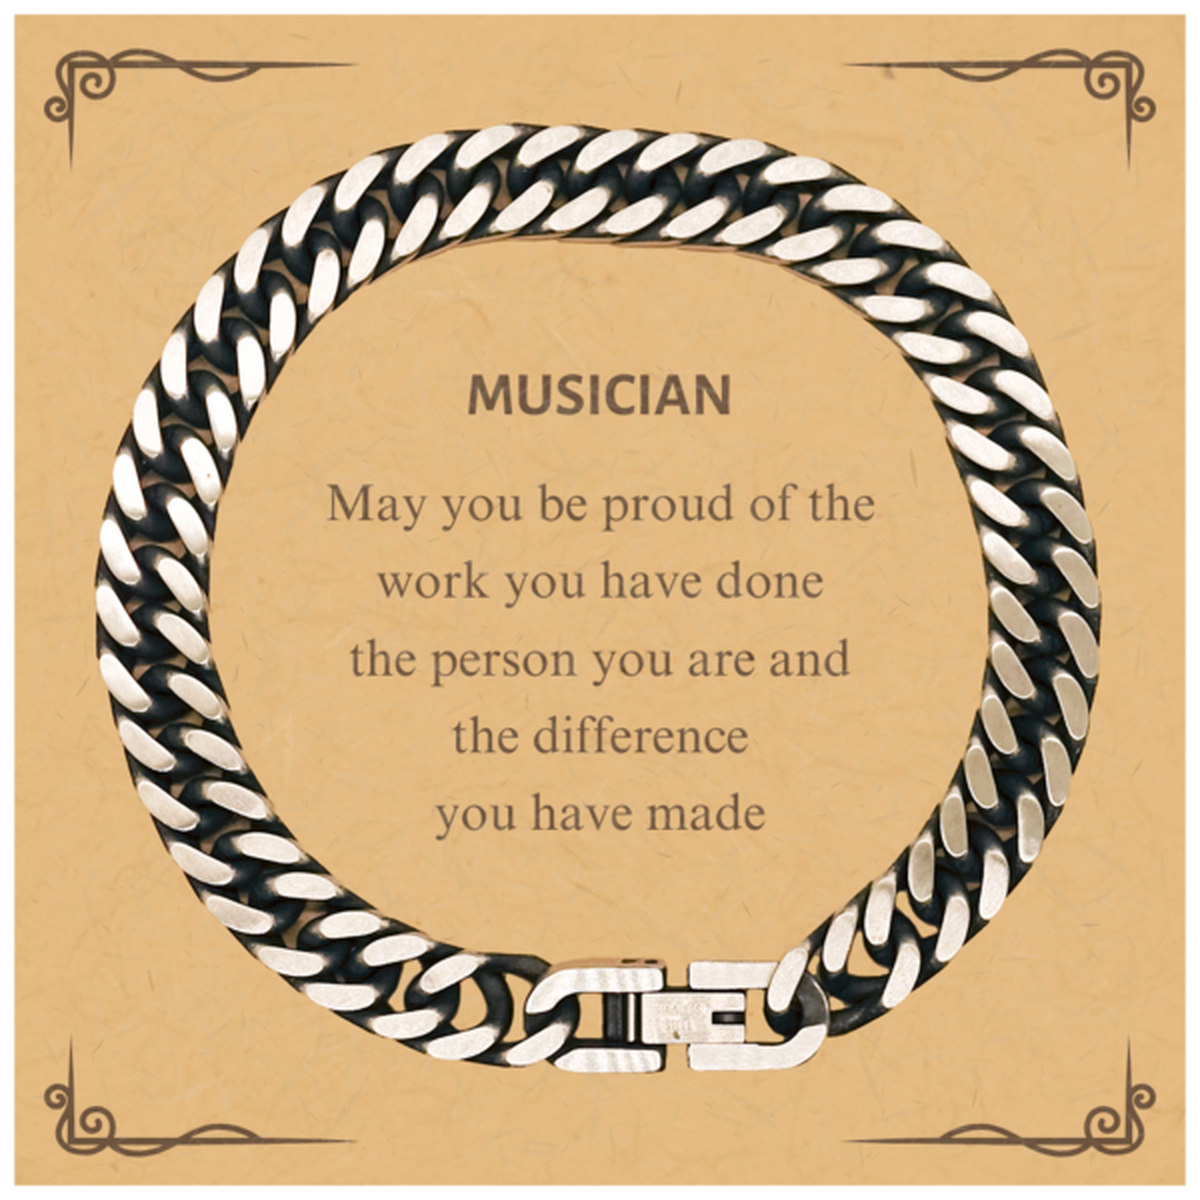 Musician May you be proud of the work you have done, Retirement Musician Cuban Link Chain Bracelet for Colleague Appreciation Gifts Amazing for Musician